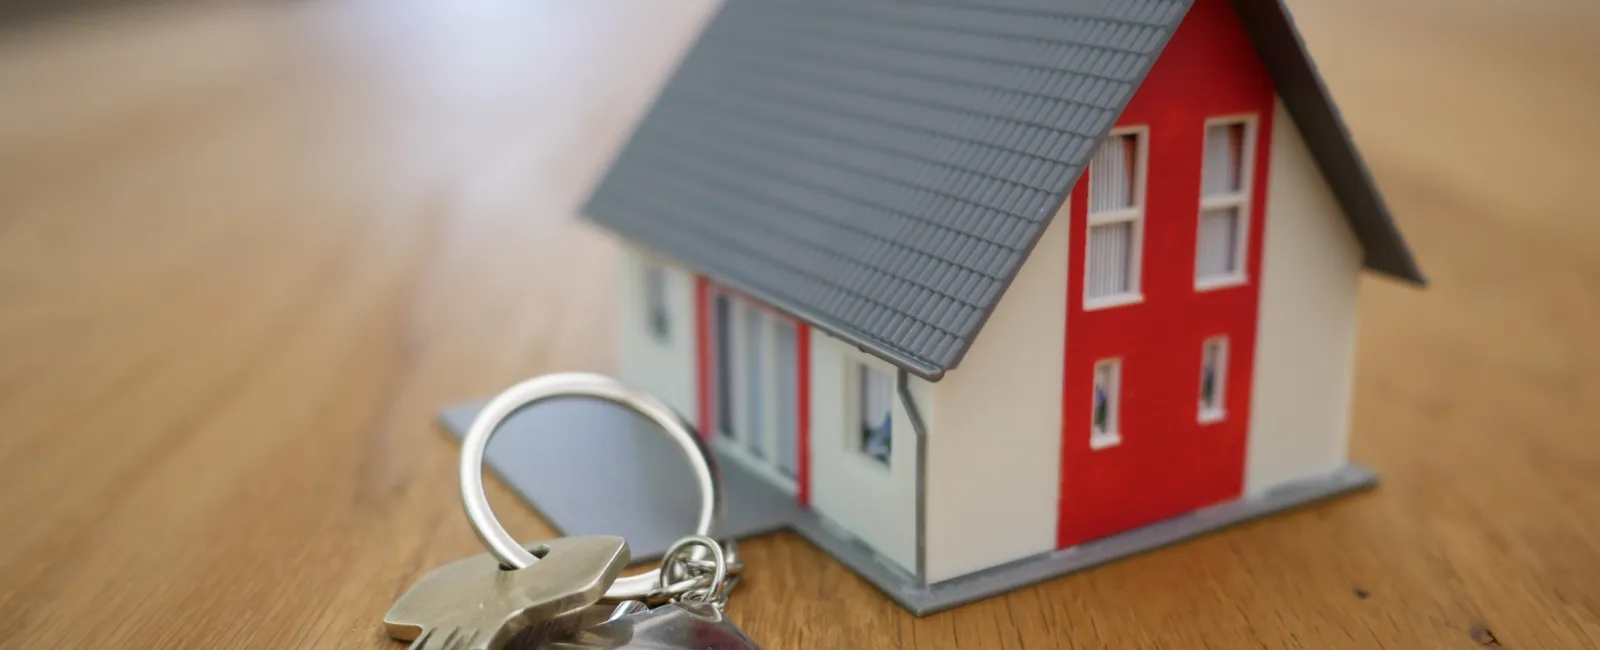 Symbolic Image of New Homeownership - Miniature House on Table, Keys in Hand, Celebrating the Exciting Moment of Home Purchase